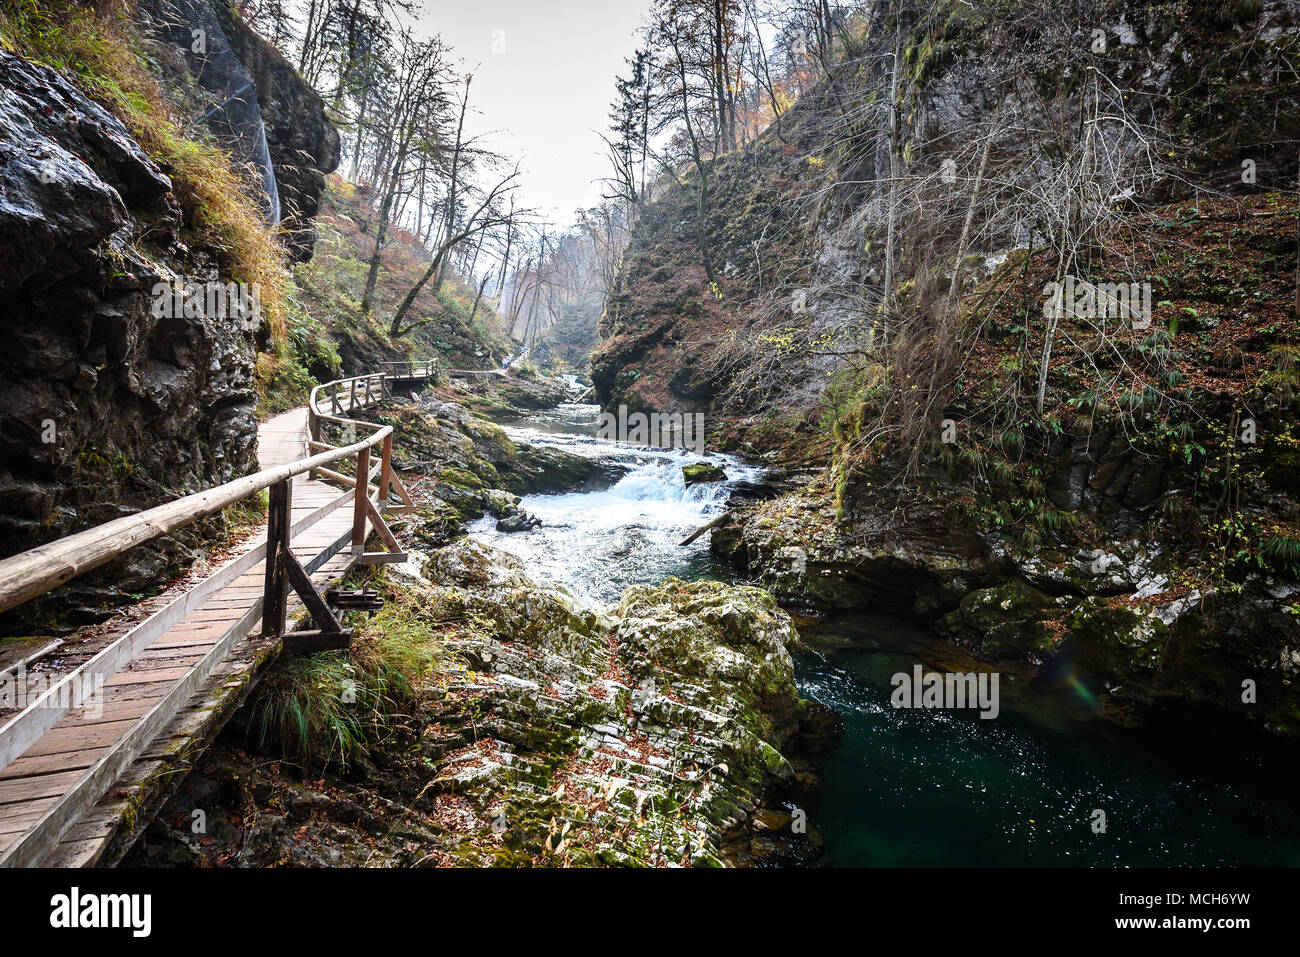 Soteska Vintgar, The Vintgar Gorge or Bled Gorge in Slovenia. Famous canyon with river Radovna, waterfalls and wooden bridges pathway. Touristic landm Stock Photo